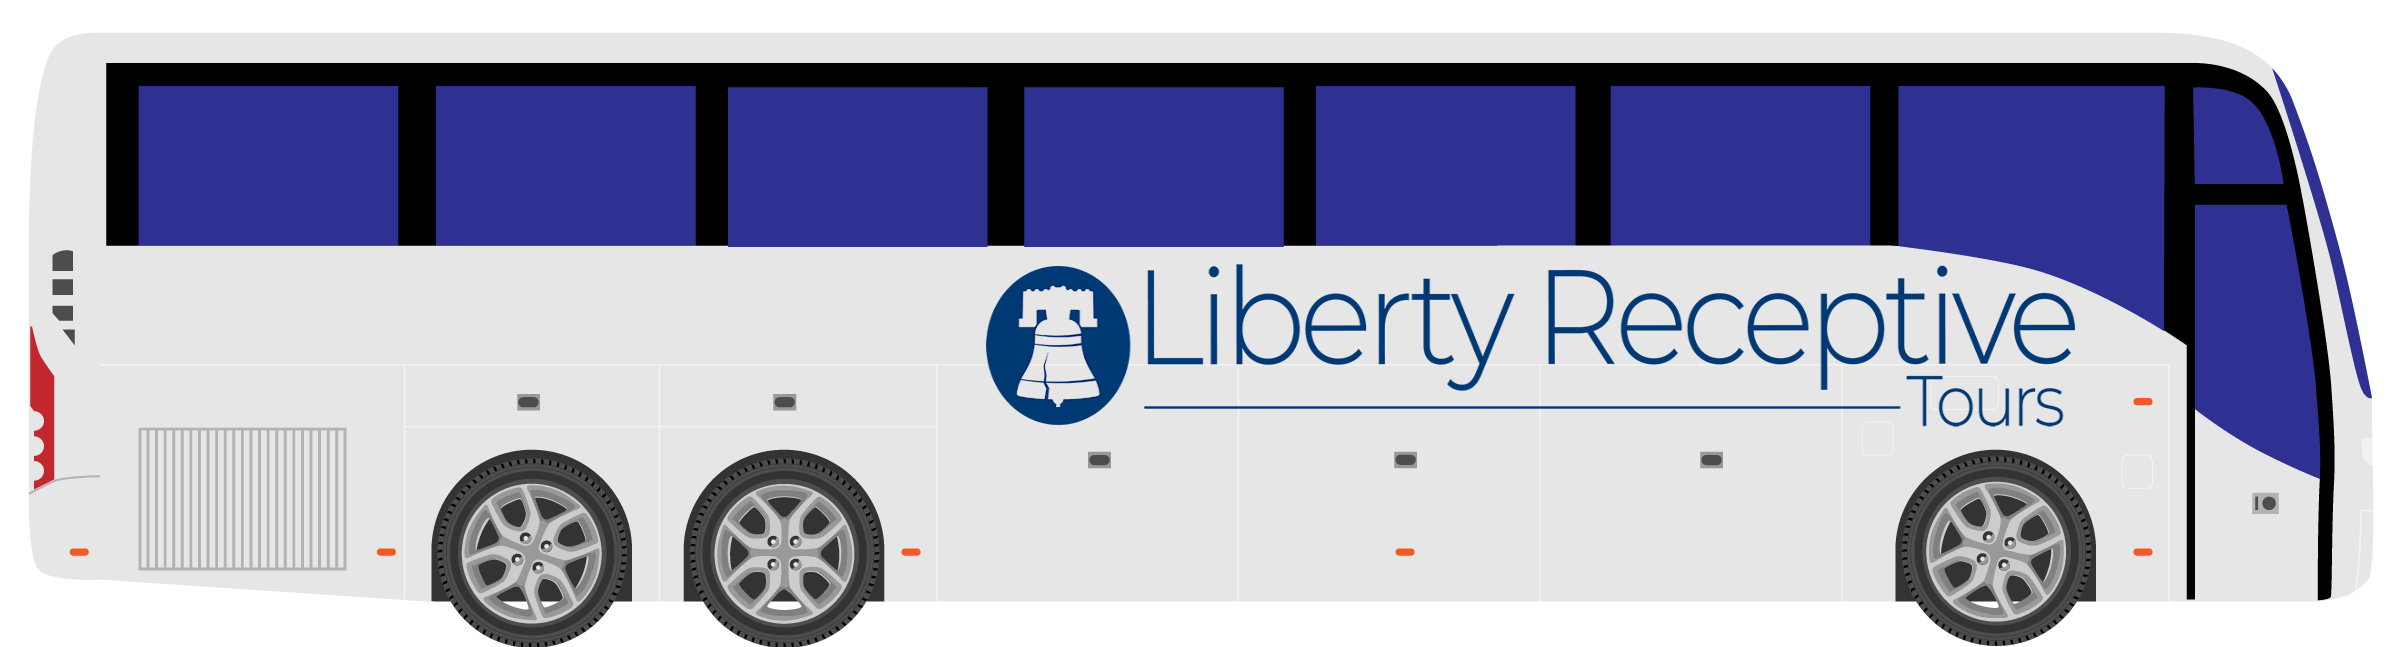 a 3d bus with Liberty Receptive Tours logo on the side